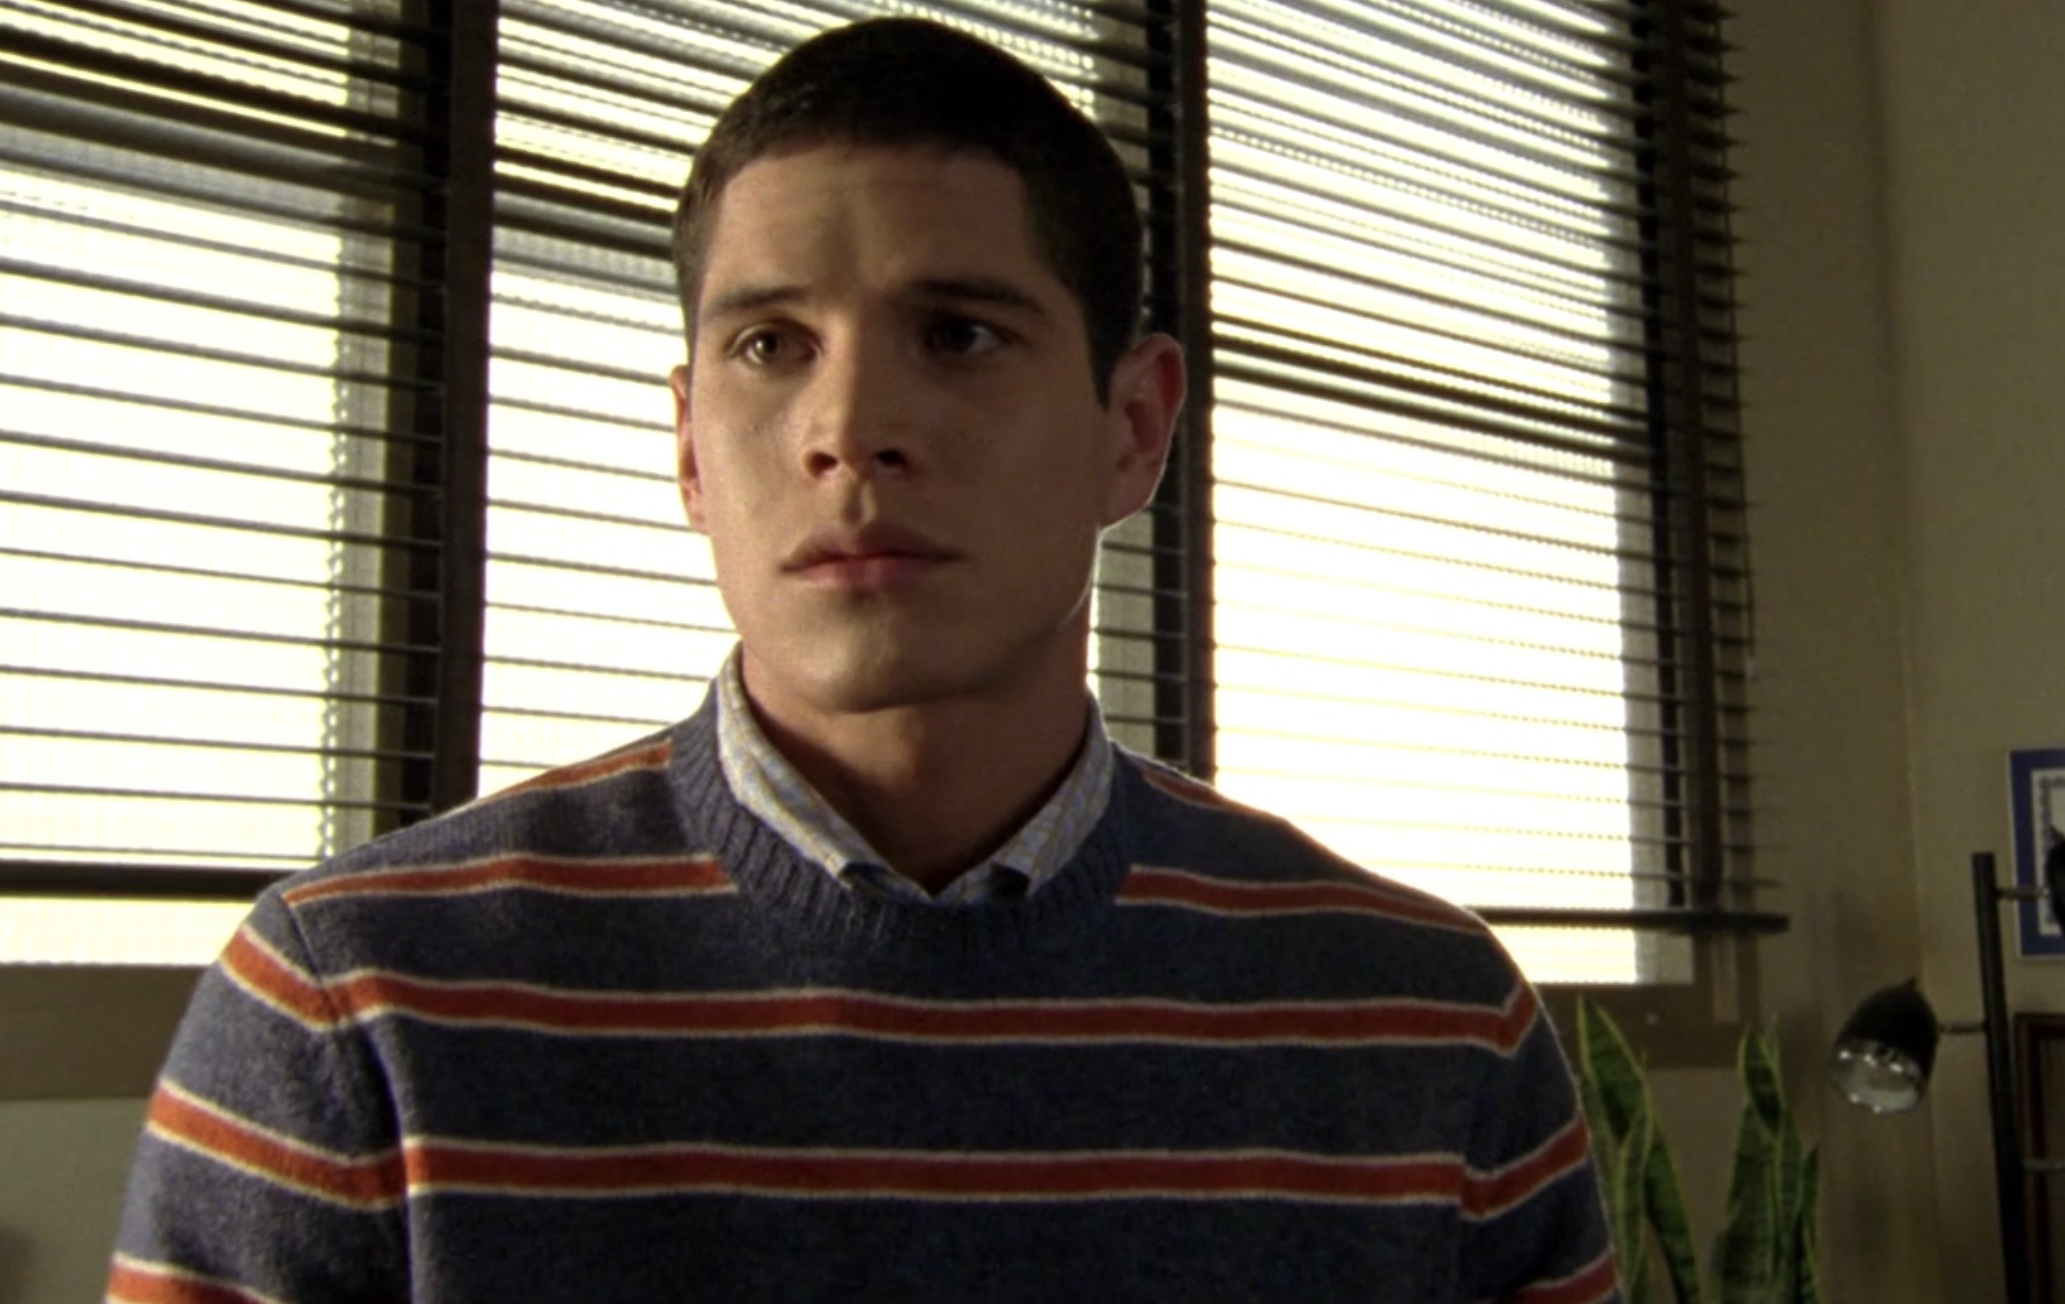 Screenshot of S1E12 of Veronica Mars. Rick is wearing a striped sweater and a collared shirt underneath. He is looking at someone off-screen and looks serious and concerned.